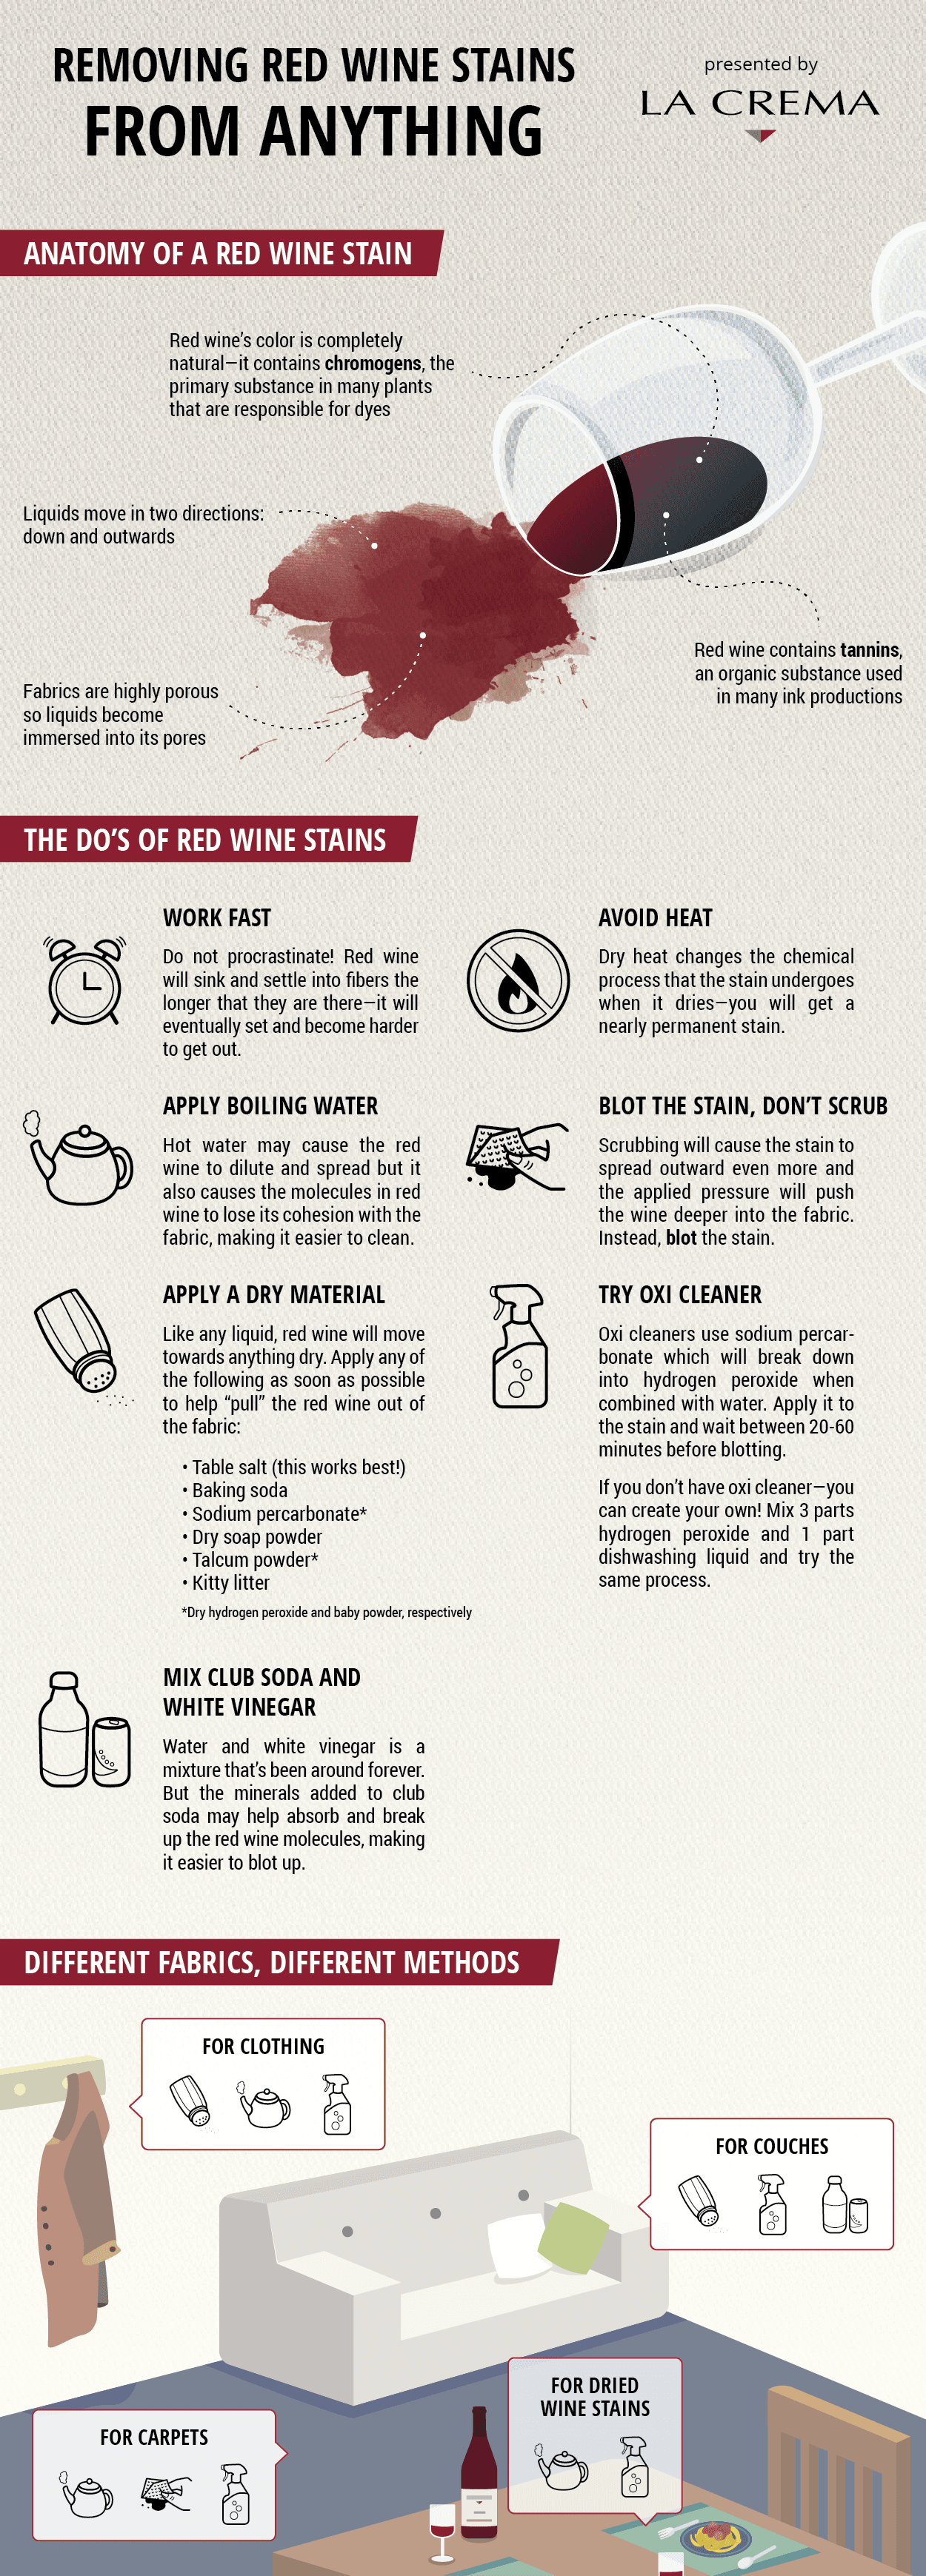 Removing red wine stains from anything - a handy how-to guide.